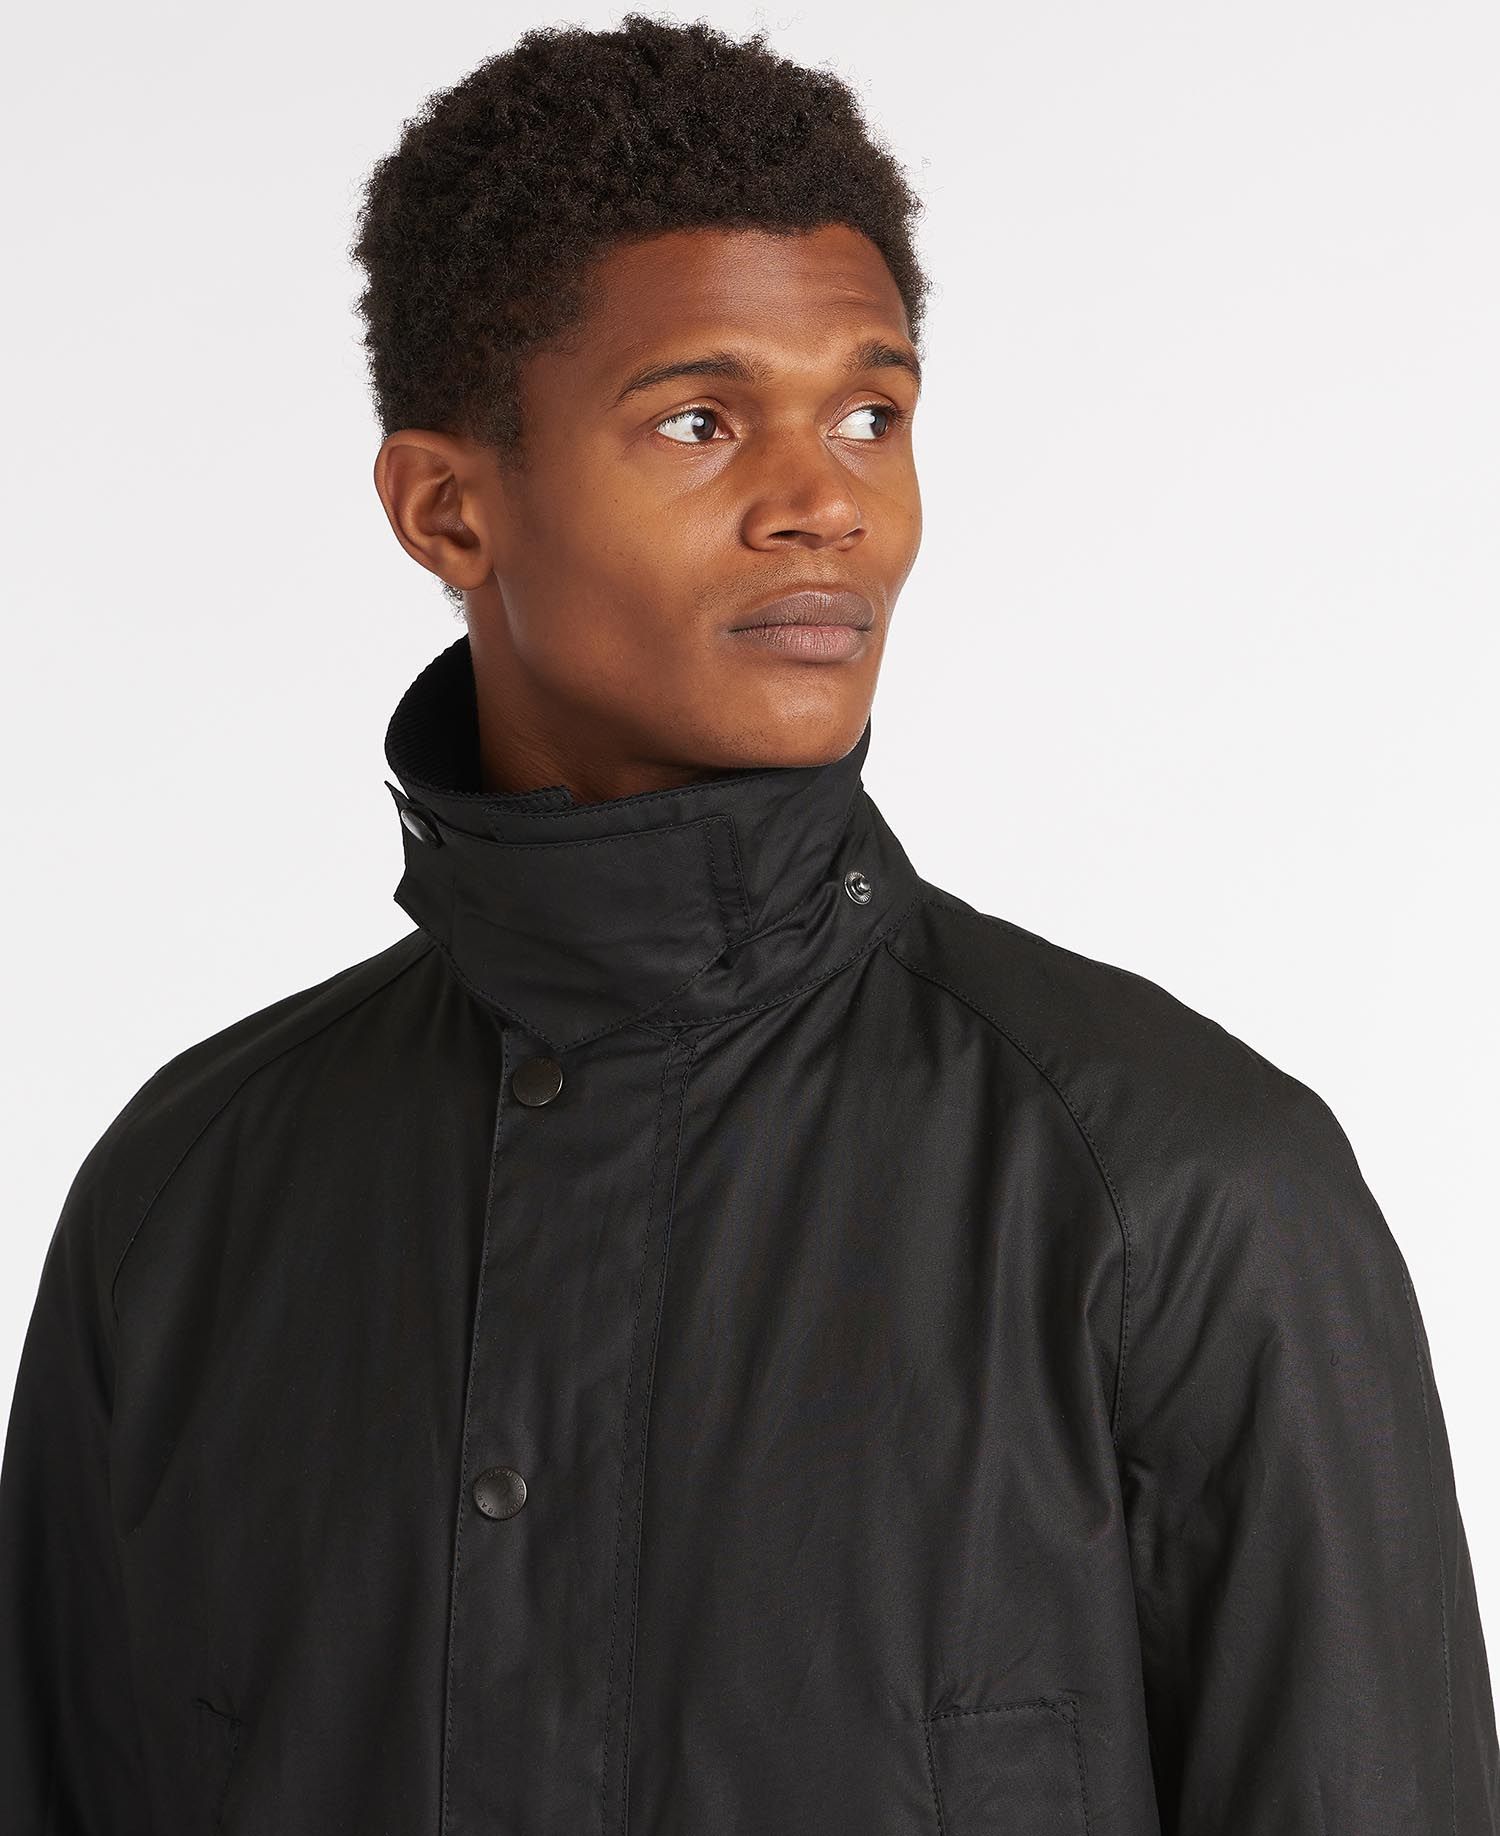 Barbour Black Ashby Wax Jacket